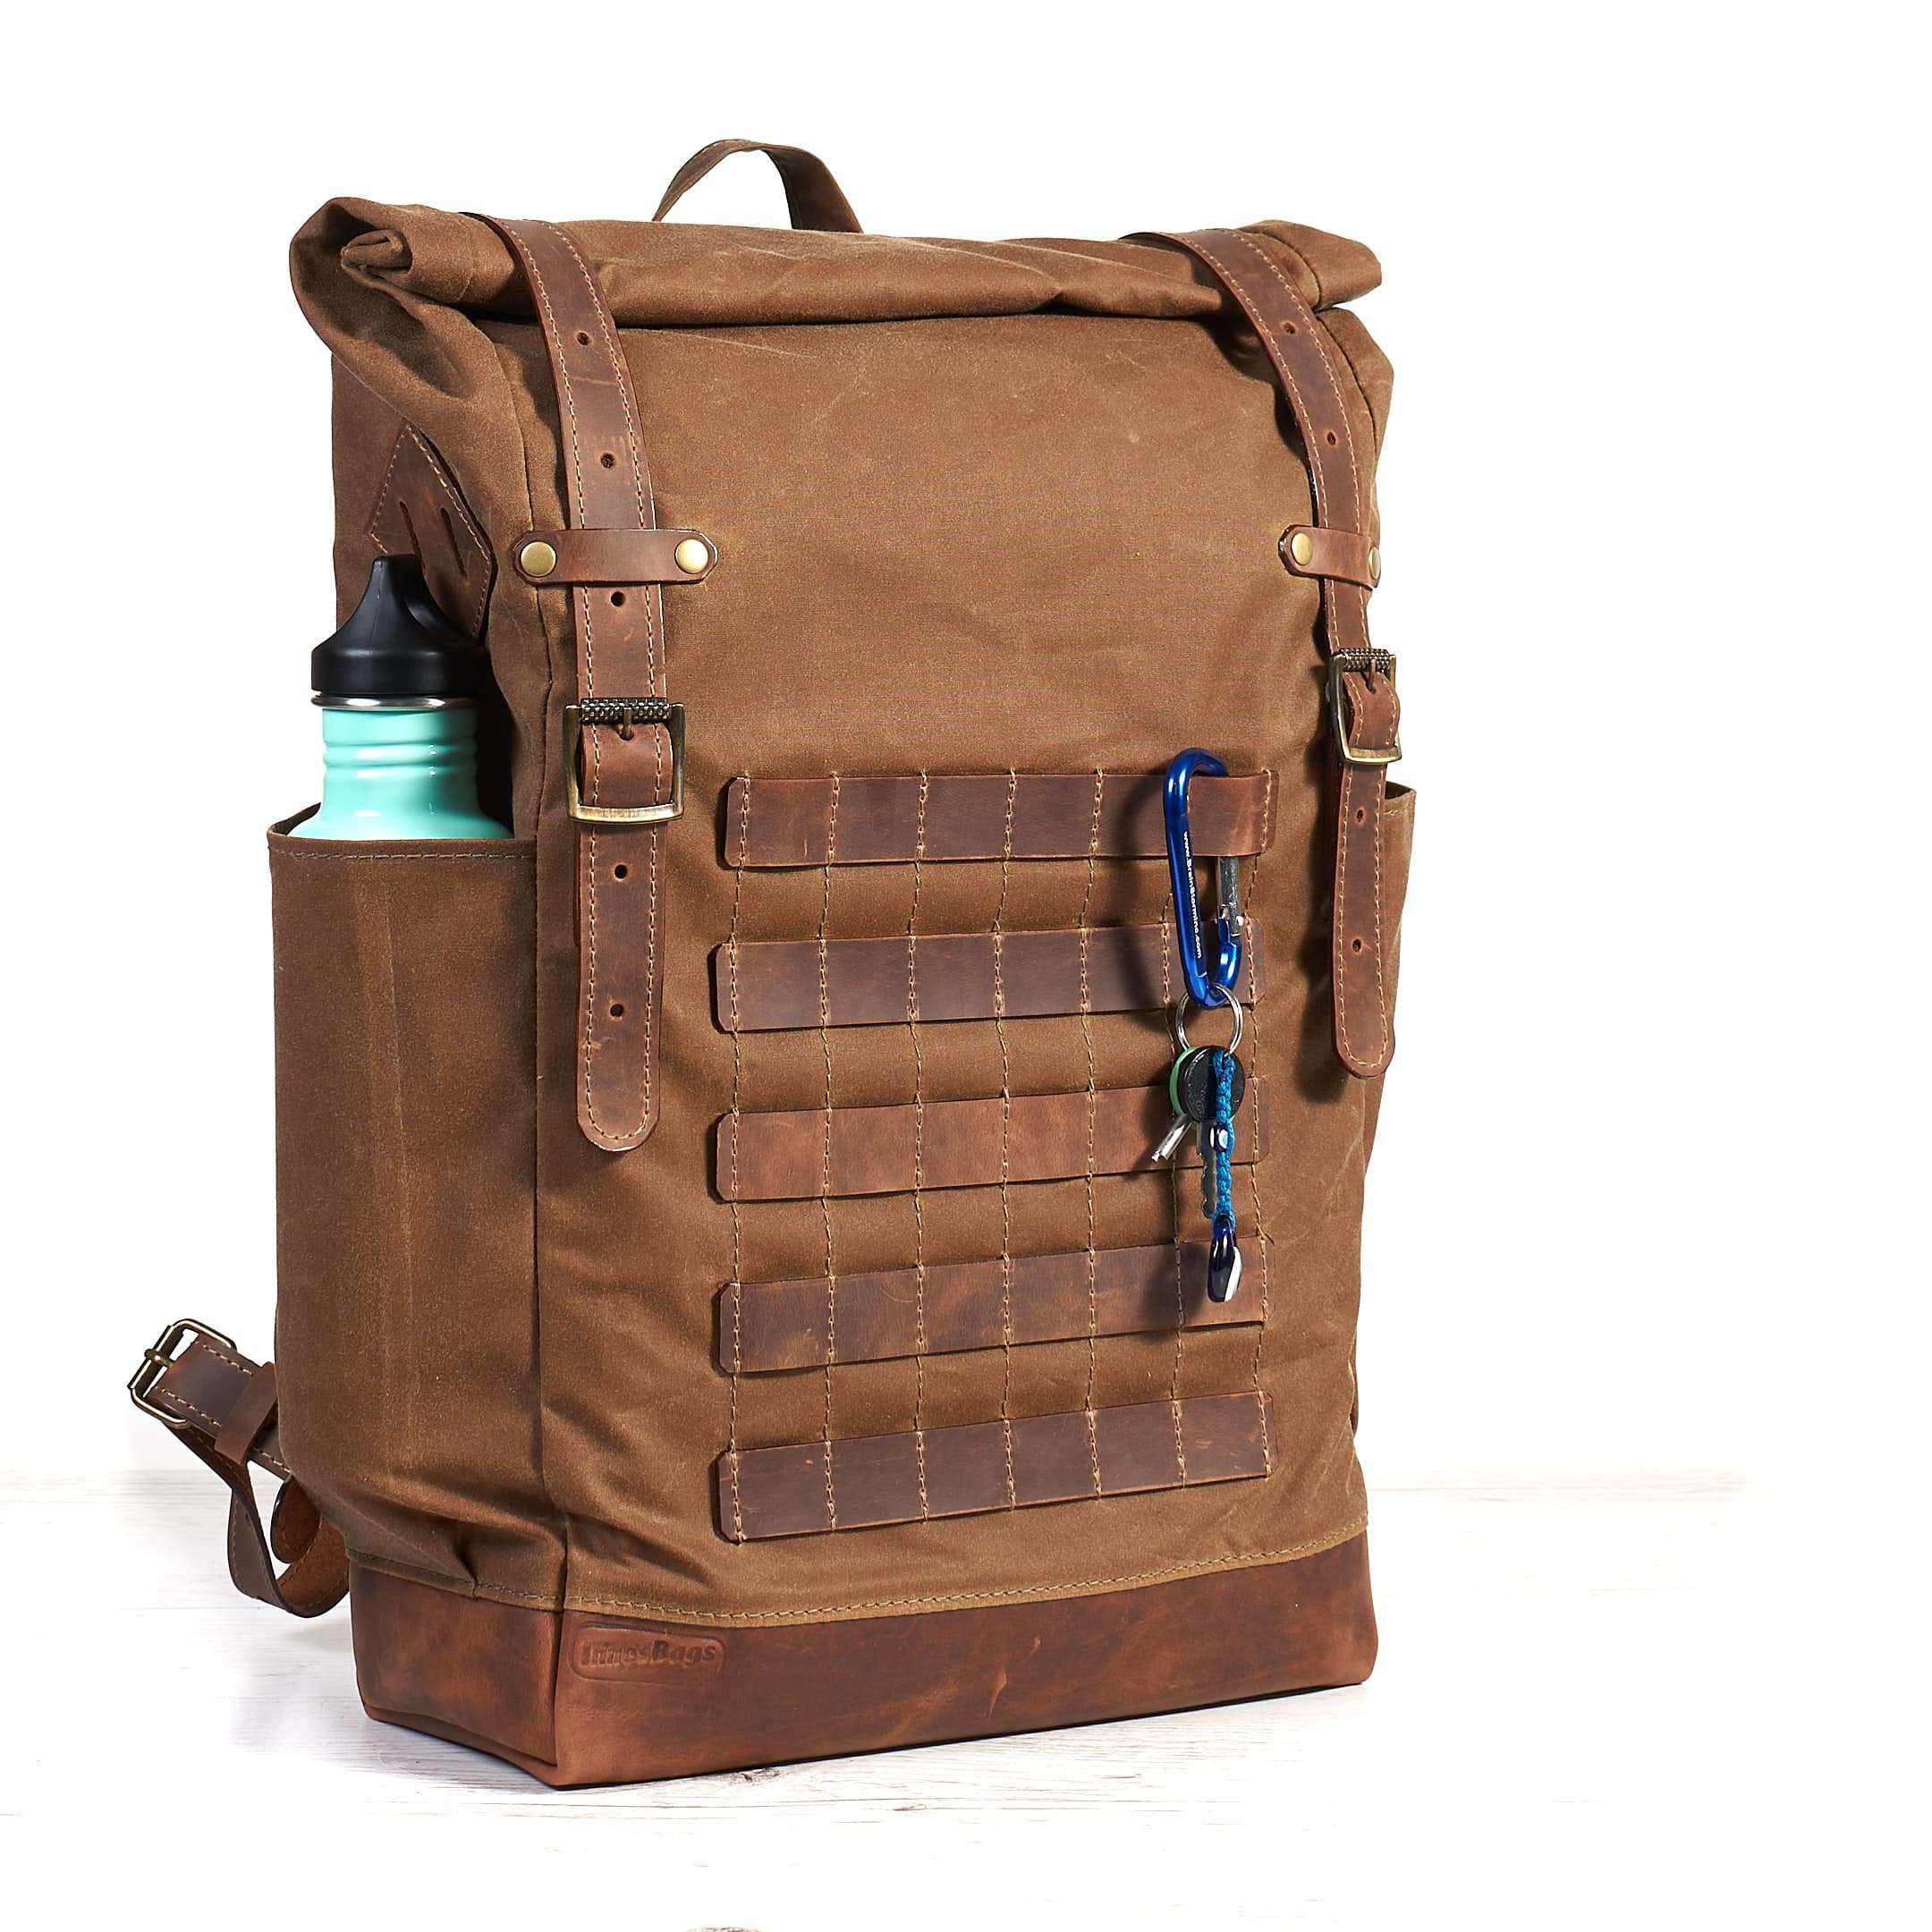 Tan brown waxed canvas leather backpack with molle grid. Travel backpack.